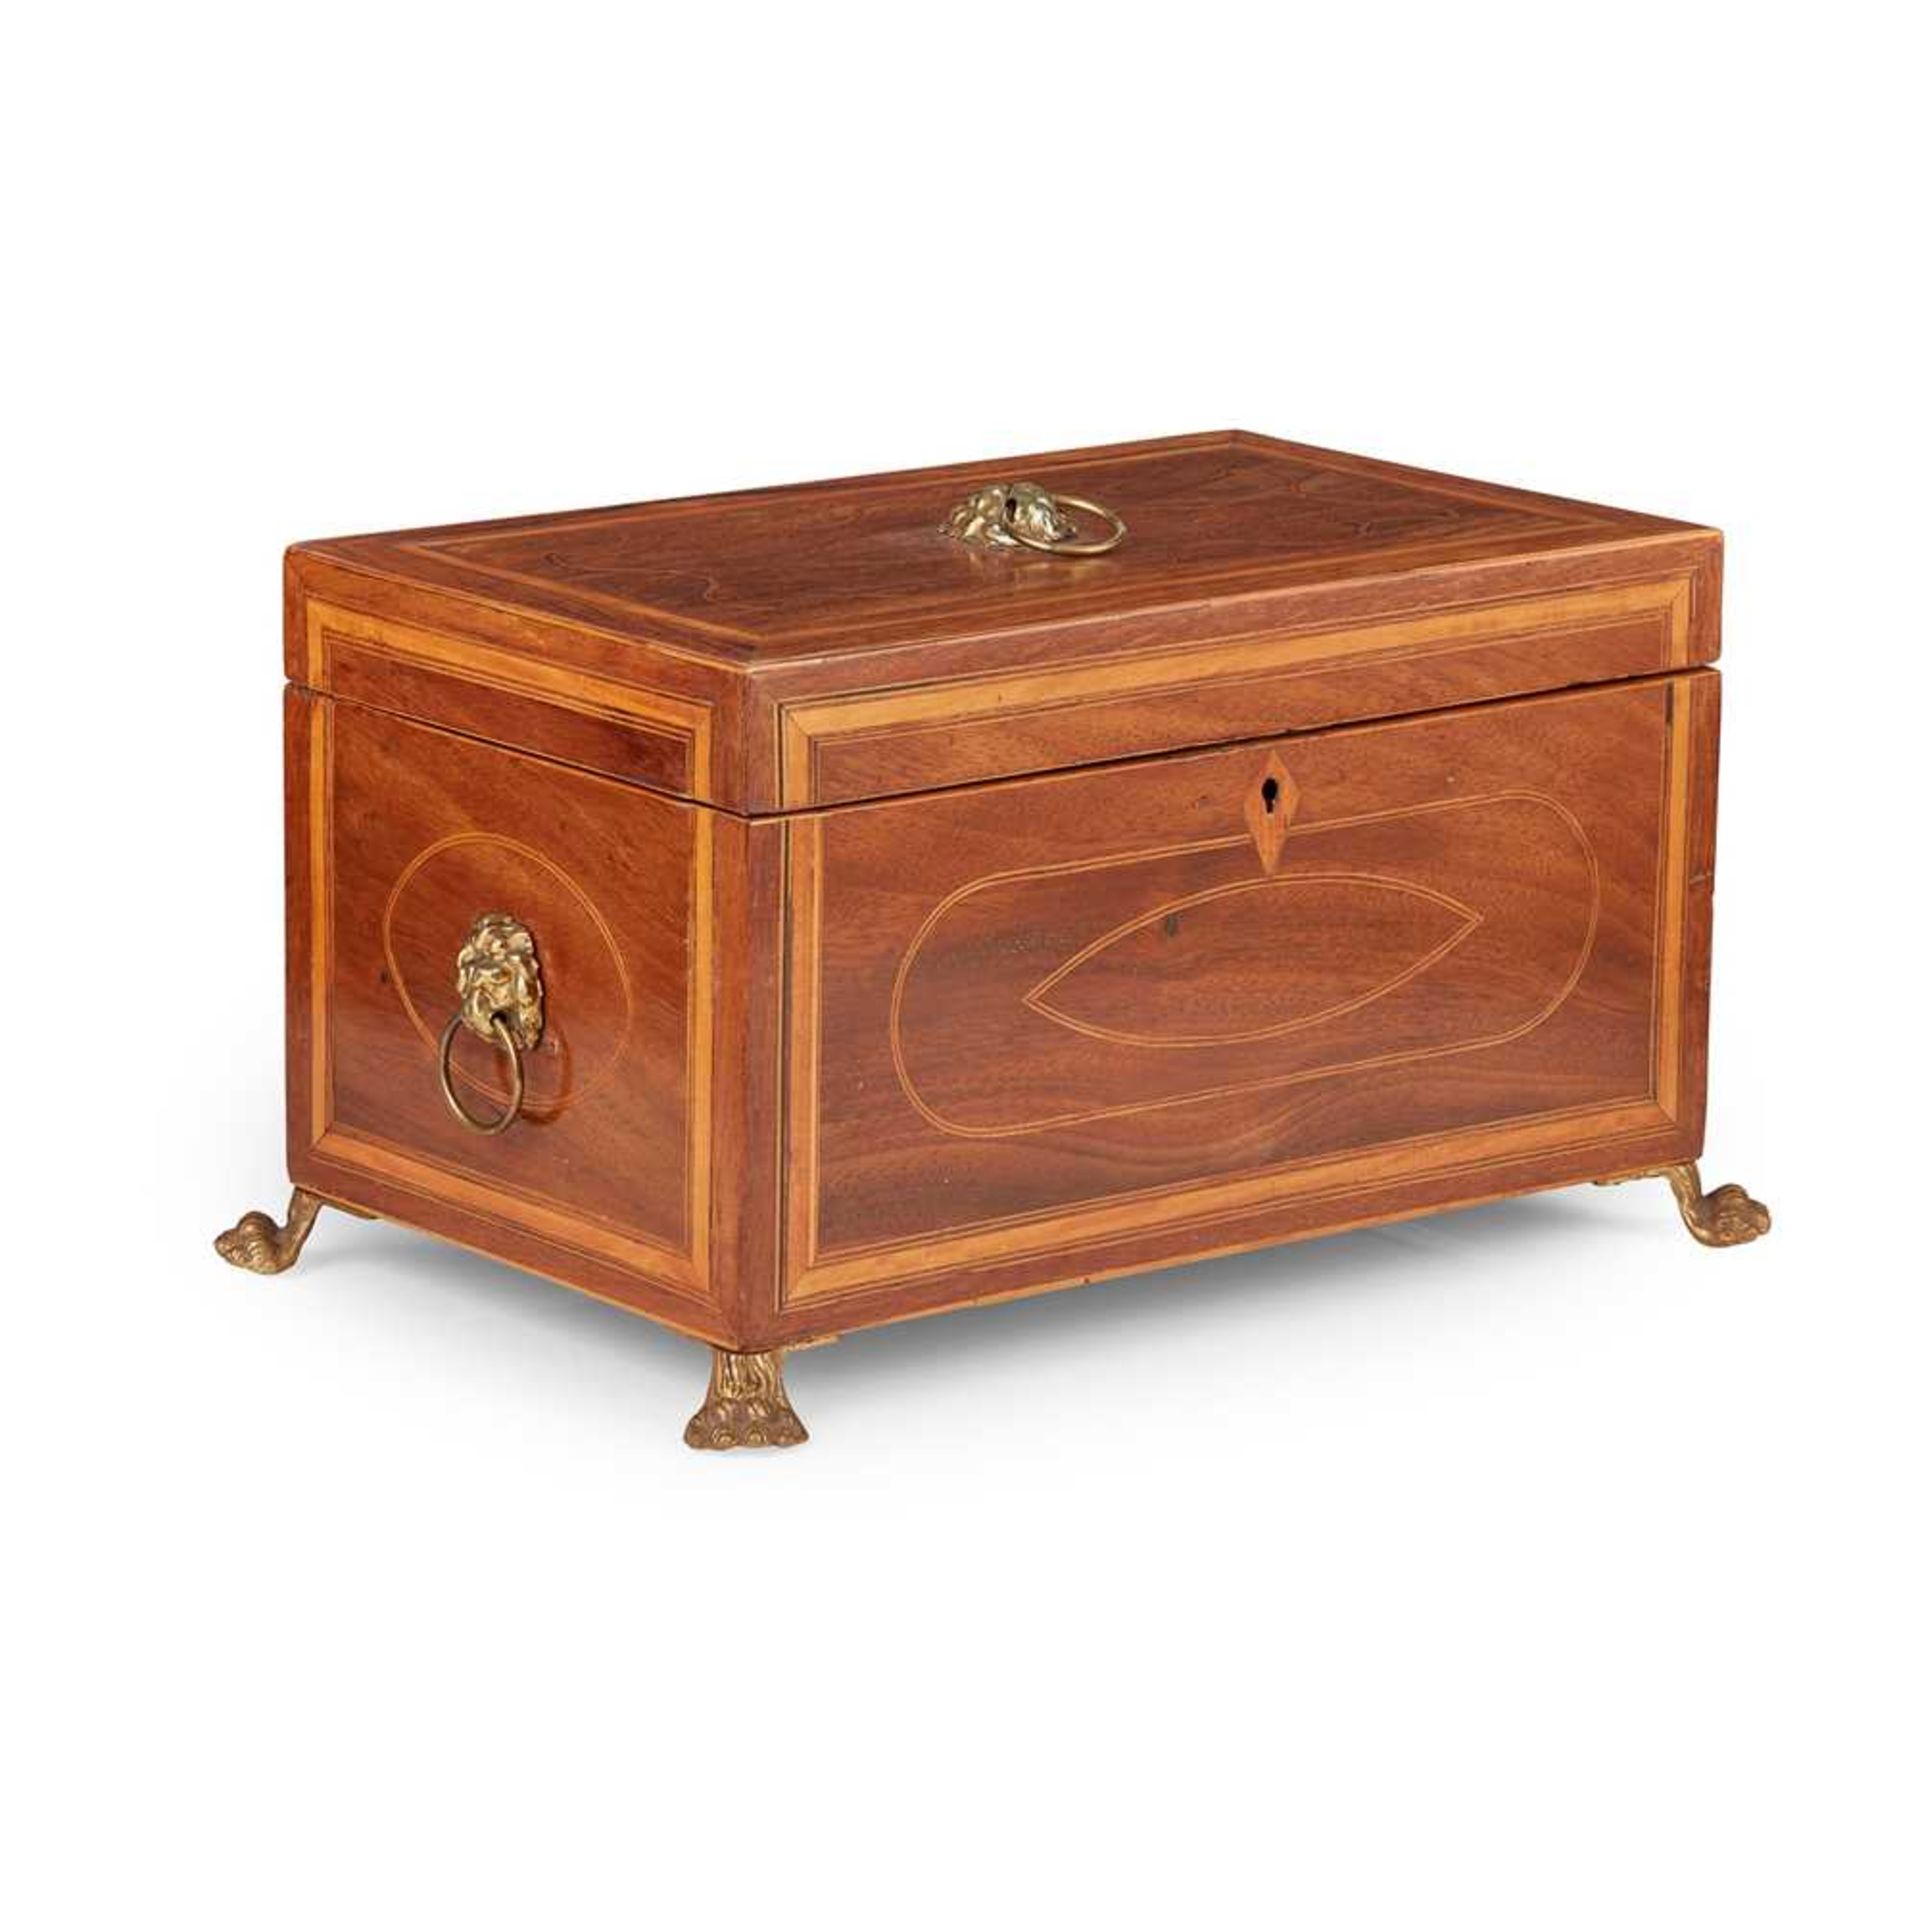 LATE GEORGE III MAHOGANY AND BOXWOOD TEA CADDY LATE 18TH/ EARLY 19TH CENTURY - Image 2 of 2